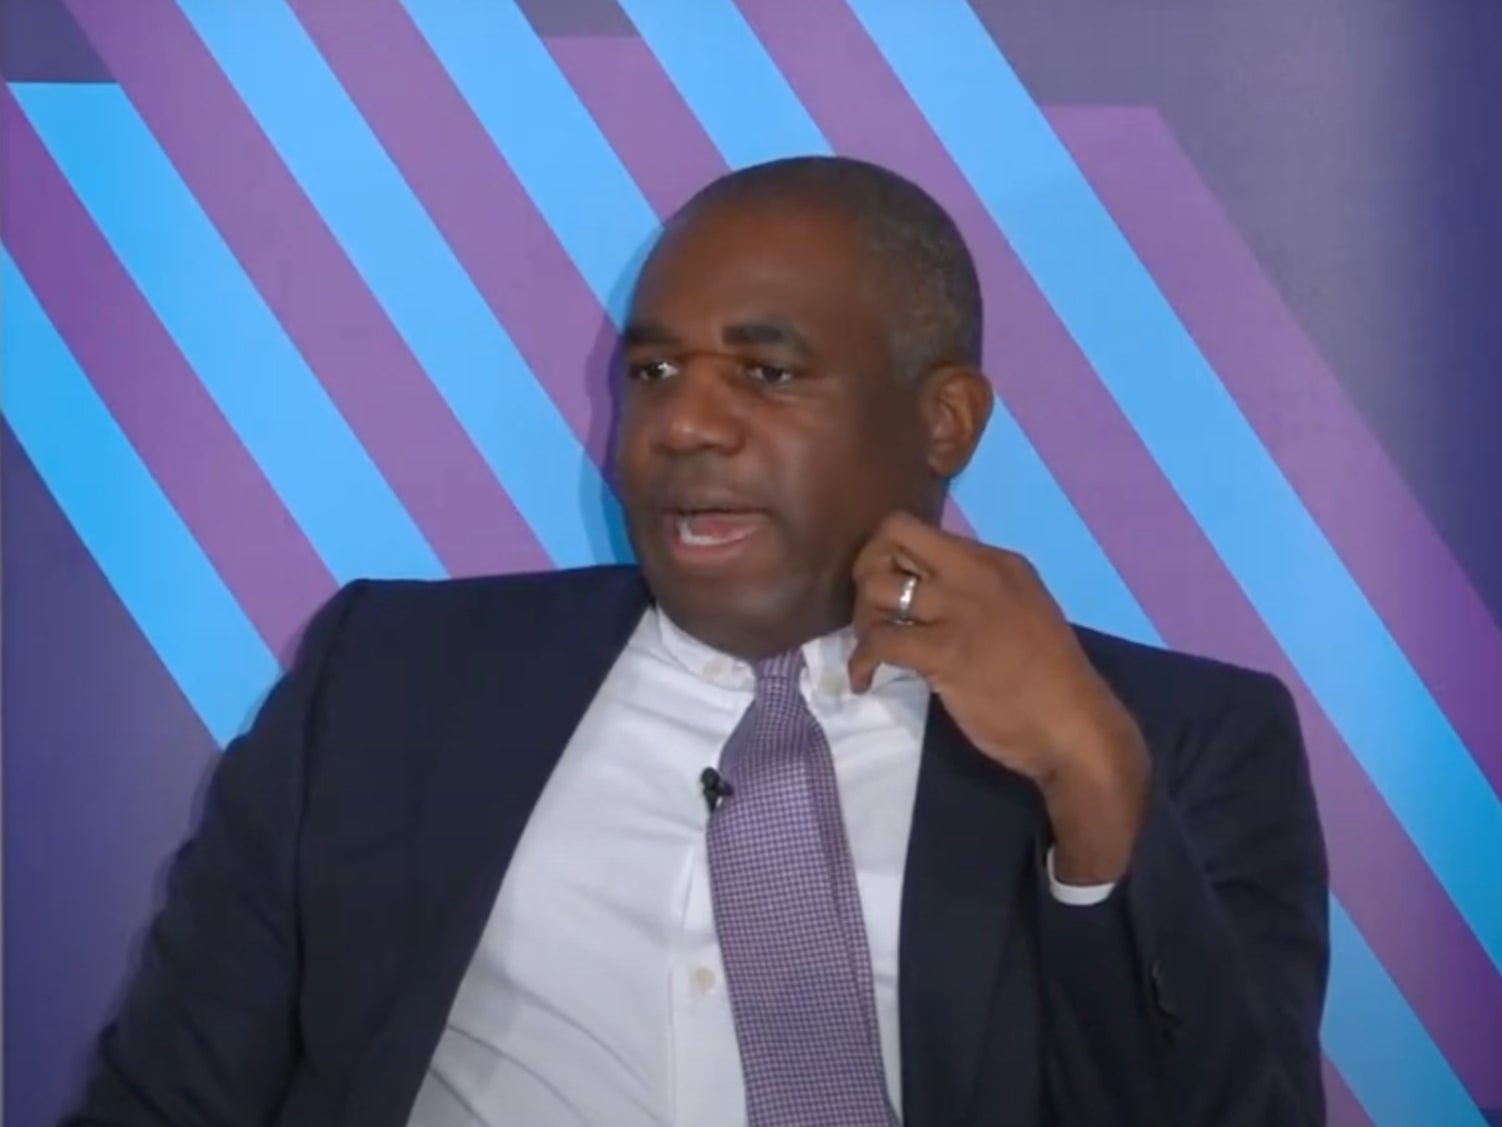 David Lammy spoke at an Institute for Government event on Friday